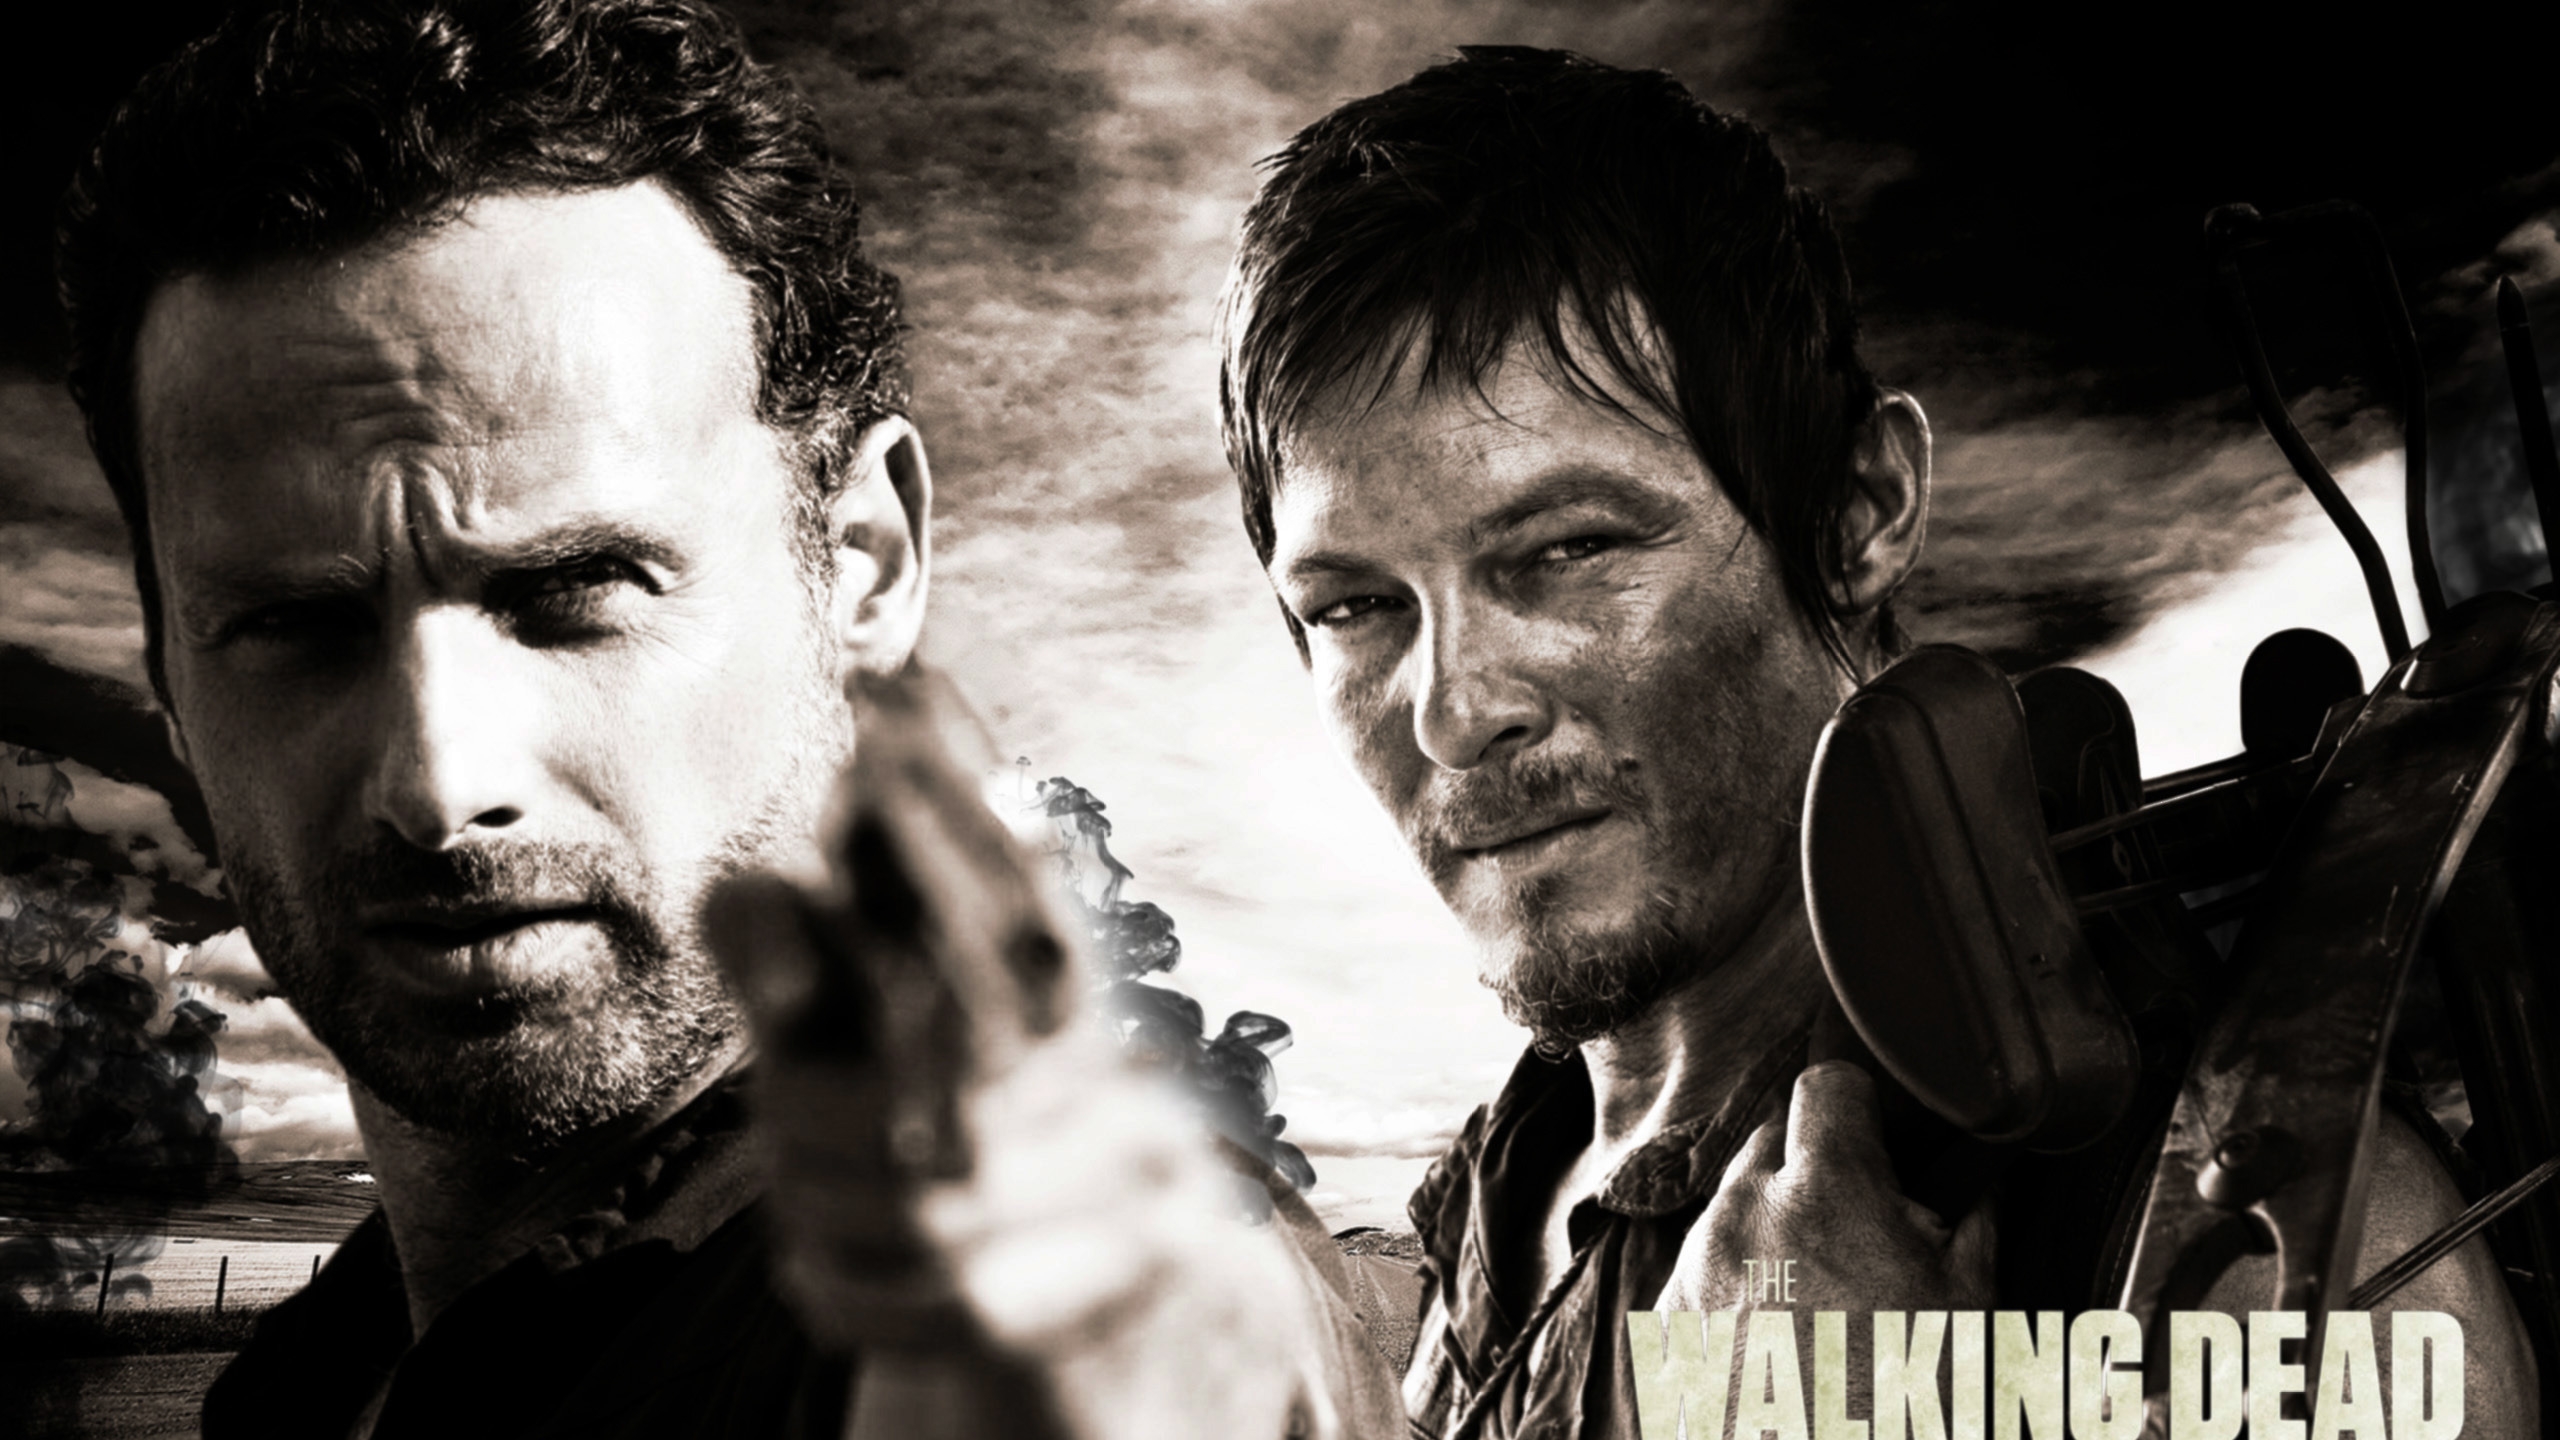 Rick and Daryl The Walking Dead for 2560x1440 HDTV resolution